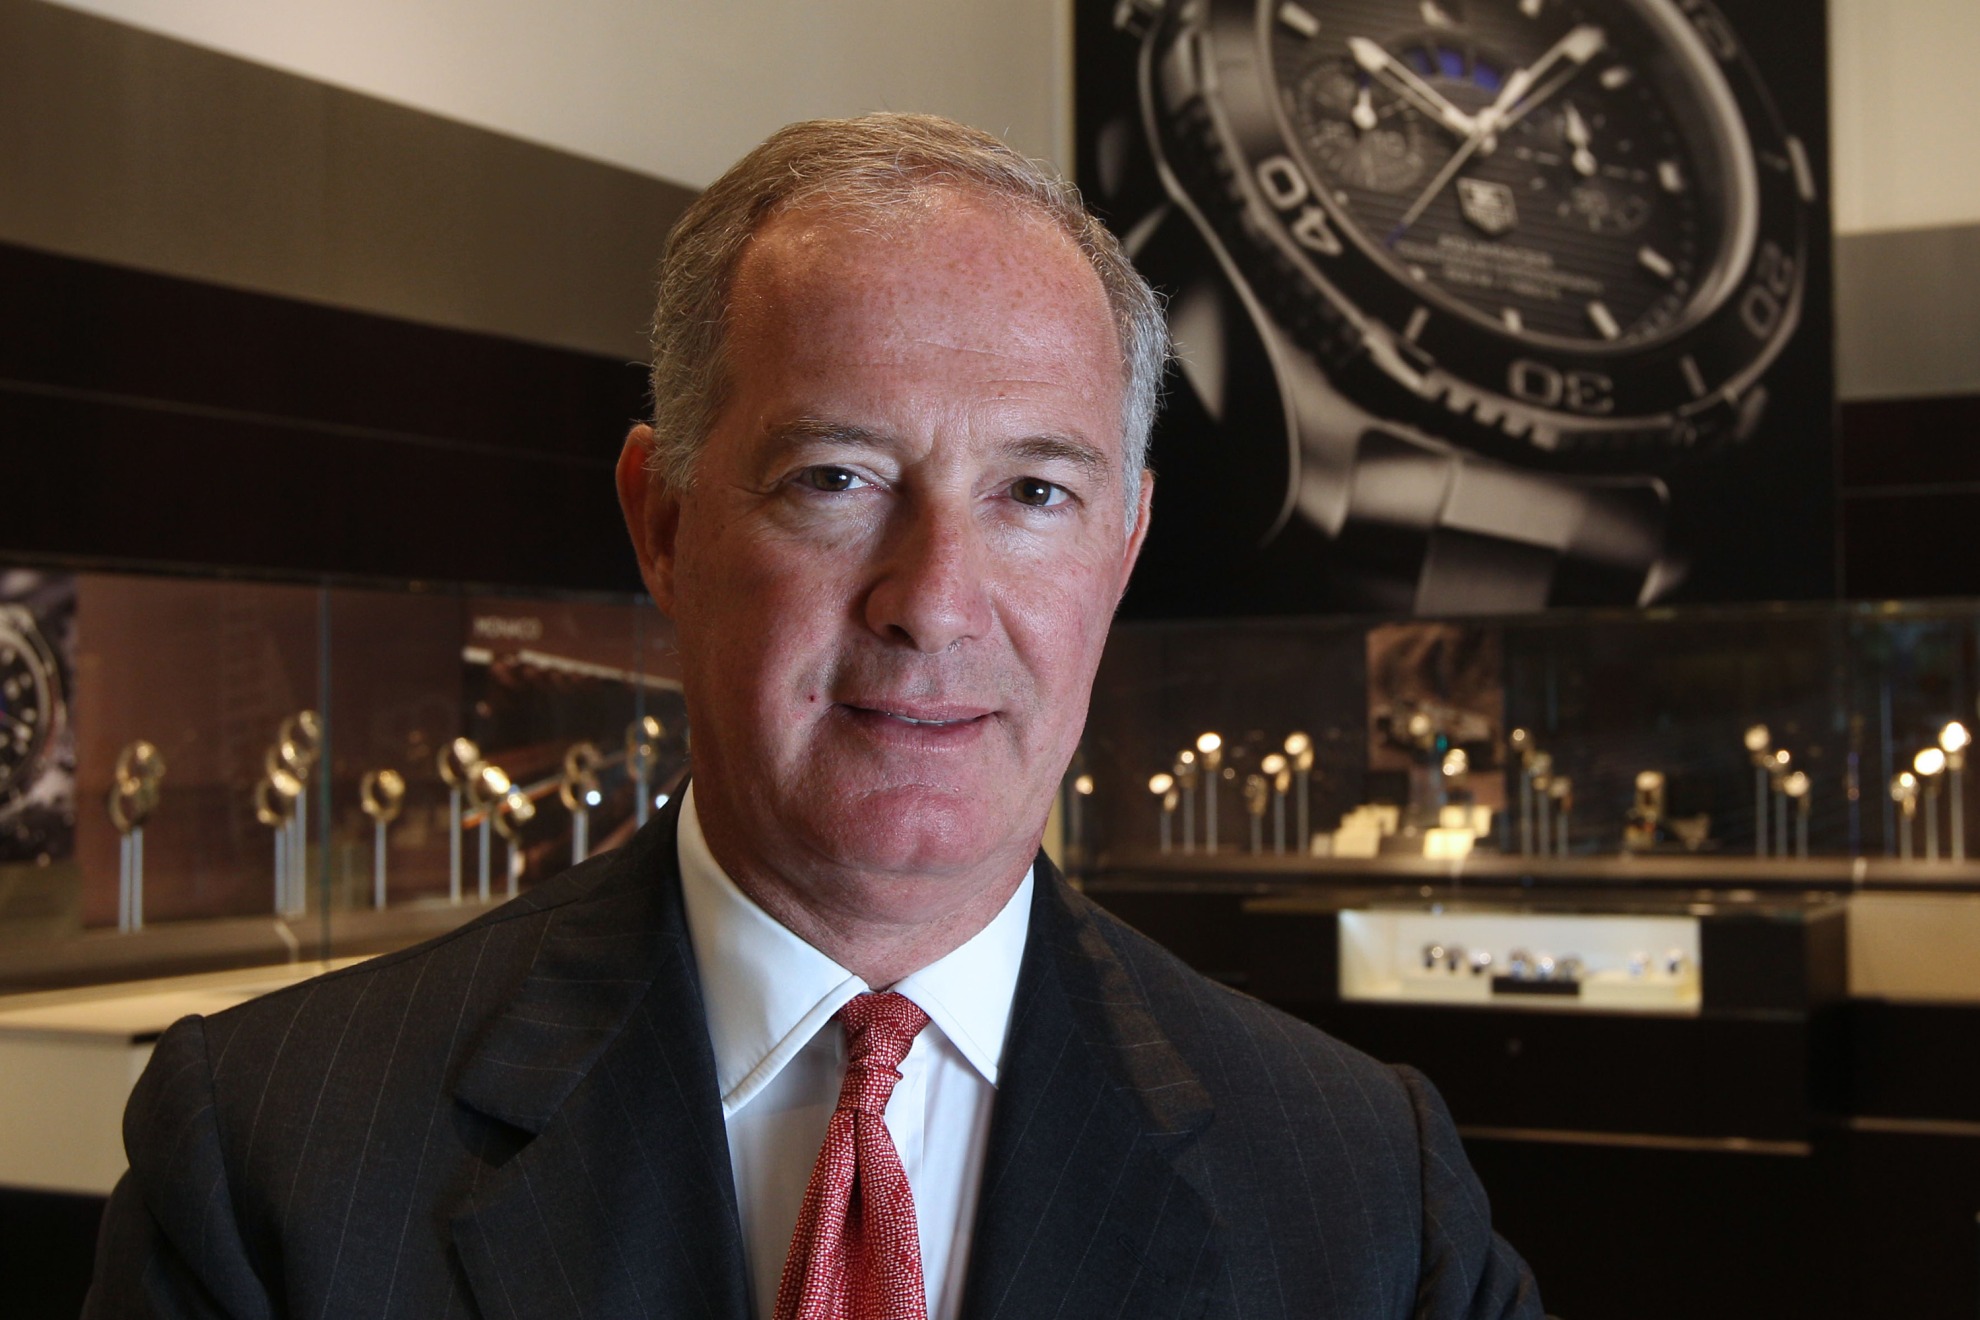 Trapani resigns as head of watches